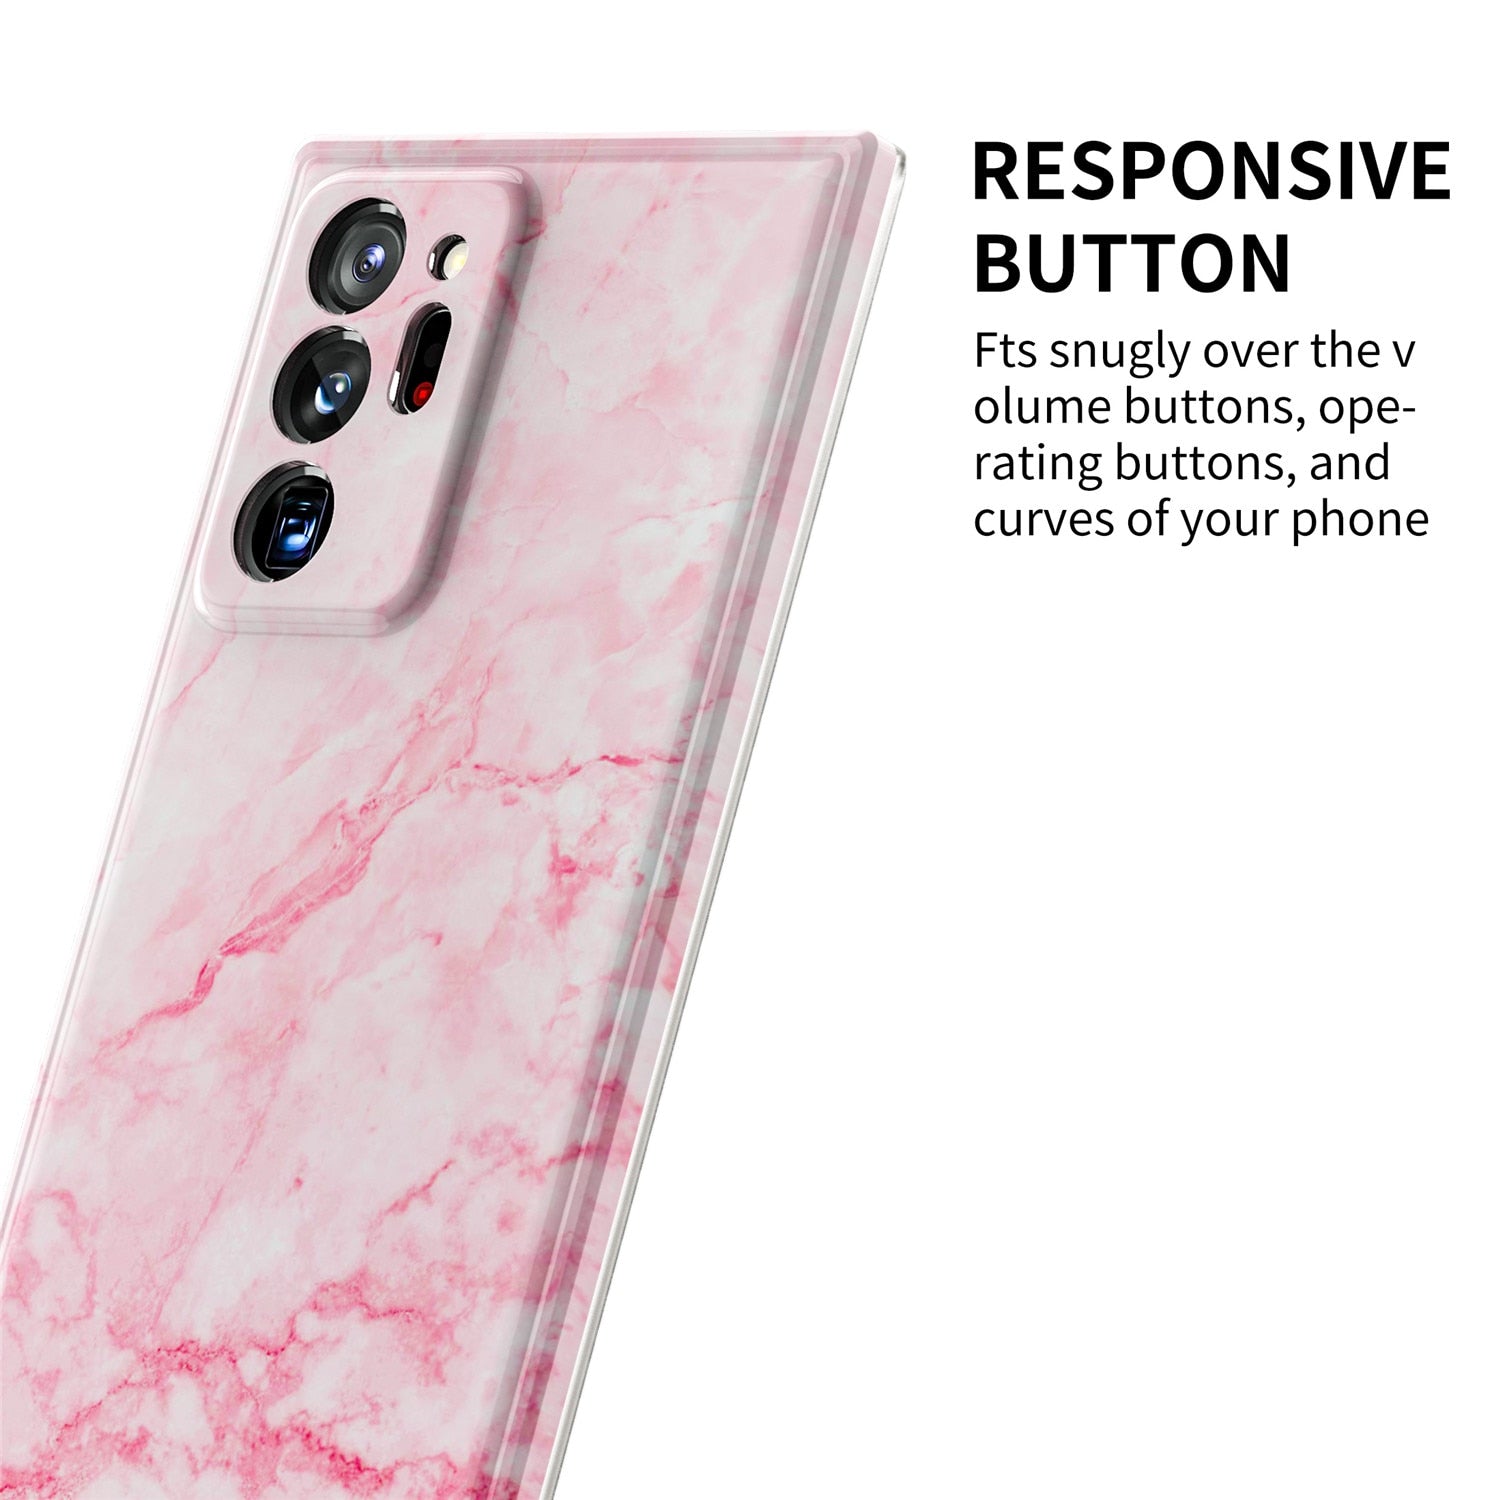 Case for Samsung Note 20 Ultra cover Marble Case, Slim Thin Glossy Soft TPU Rubber Gel Phone Case Cover for Note 20 Ultra case - 380230 Find Epic Store